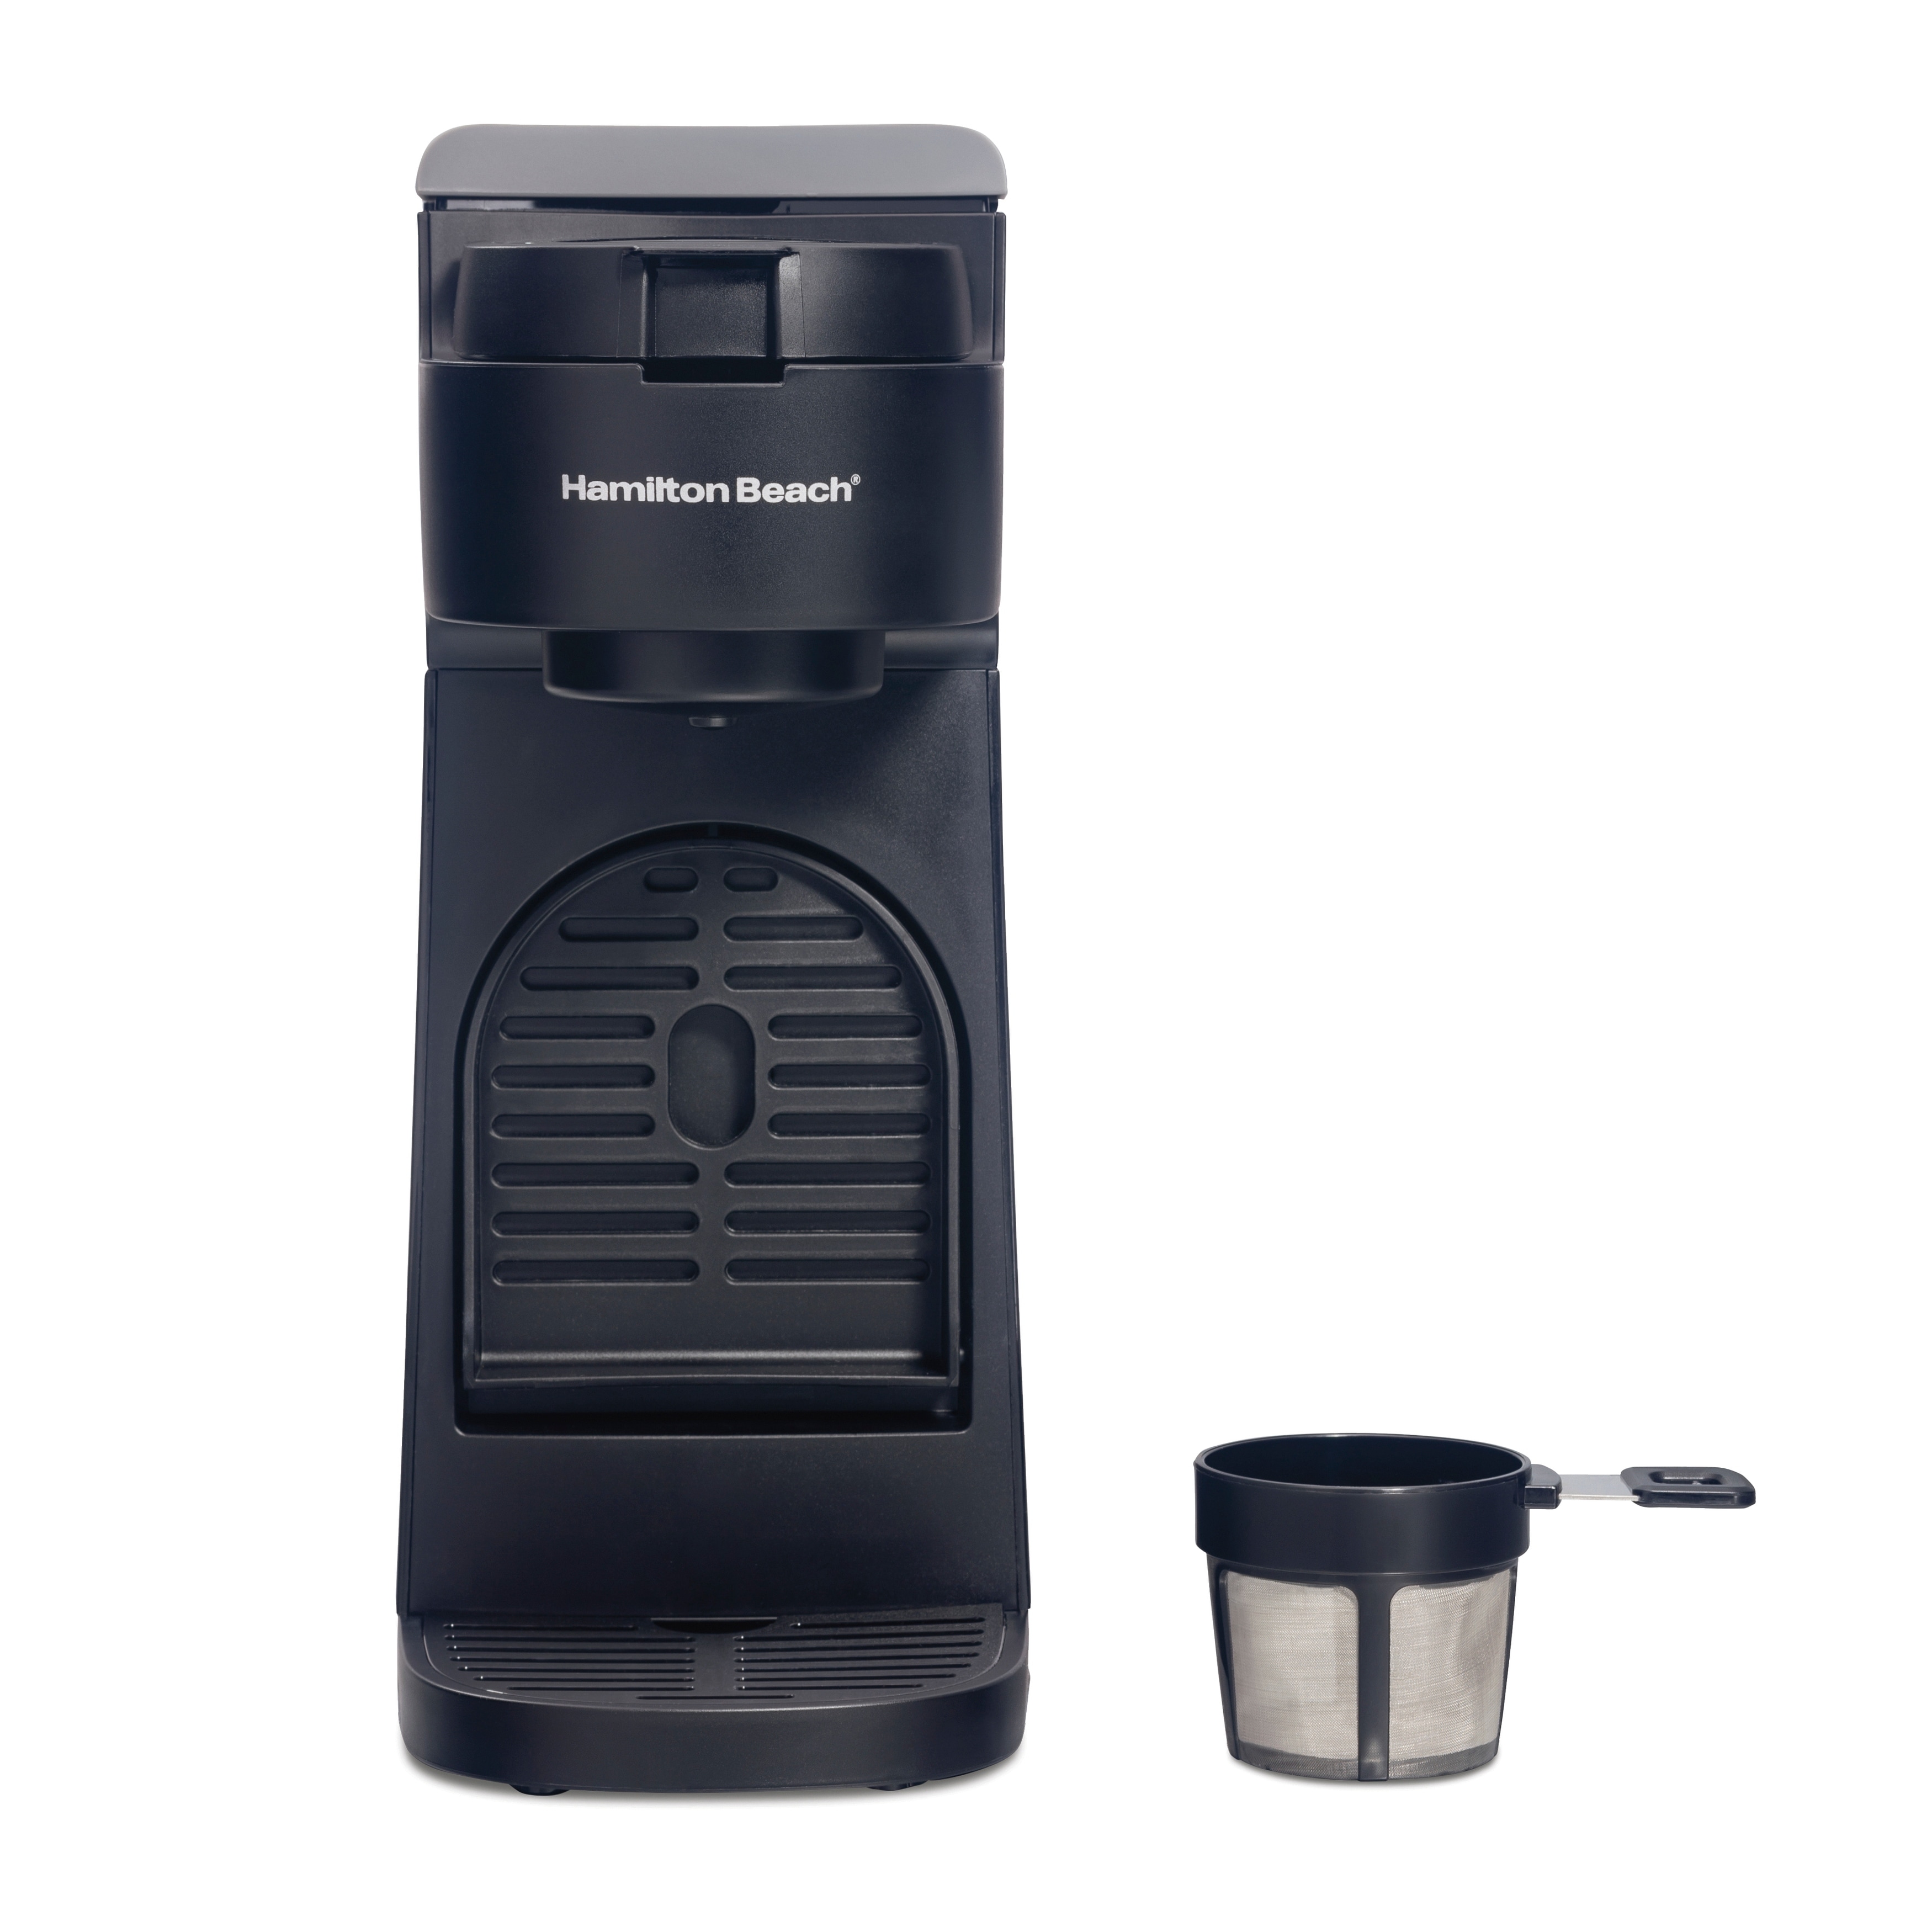 https://ak1.ostkcdn.com/images/products/is/images/direct/7d5450f0d33b25425c34398be6e5b0acfd6a89e5/The-Scoop-Single-Serve-Coffee-Maker.jpg